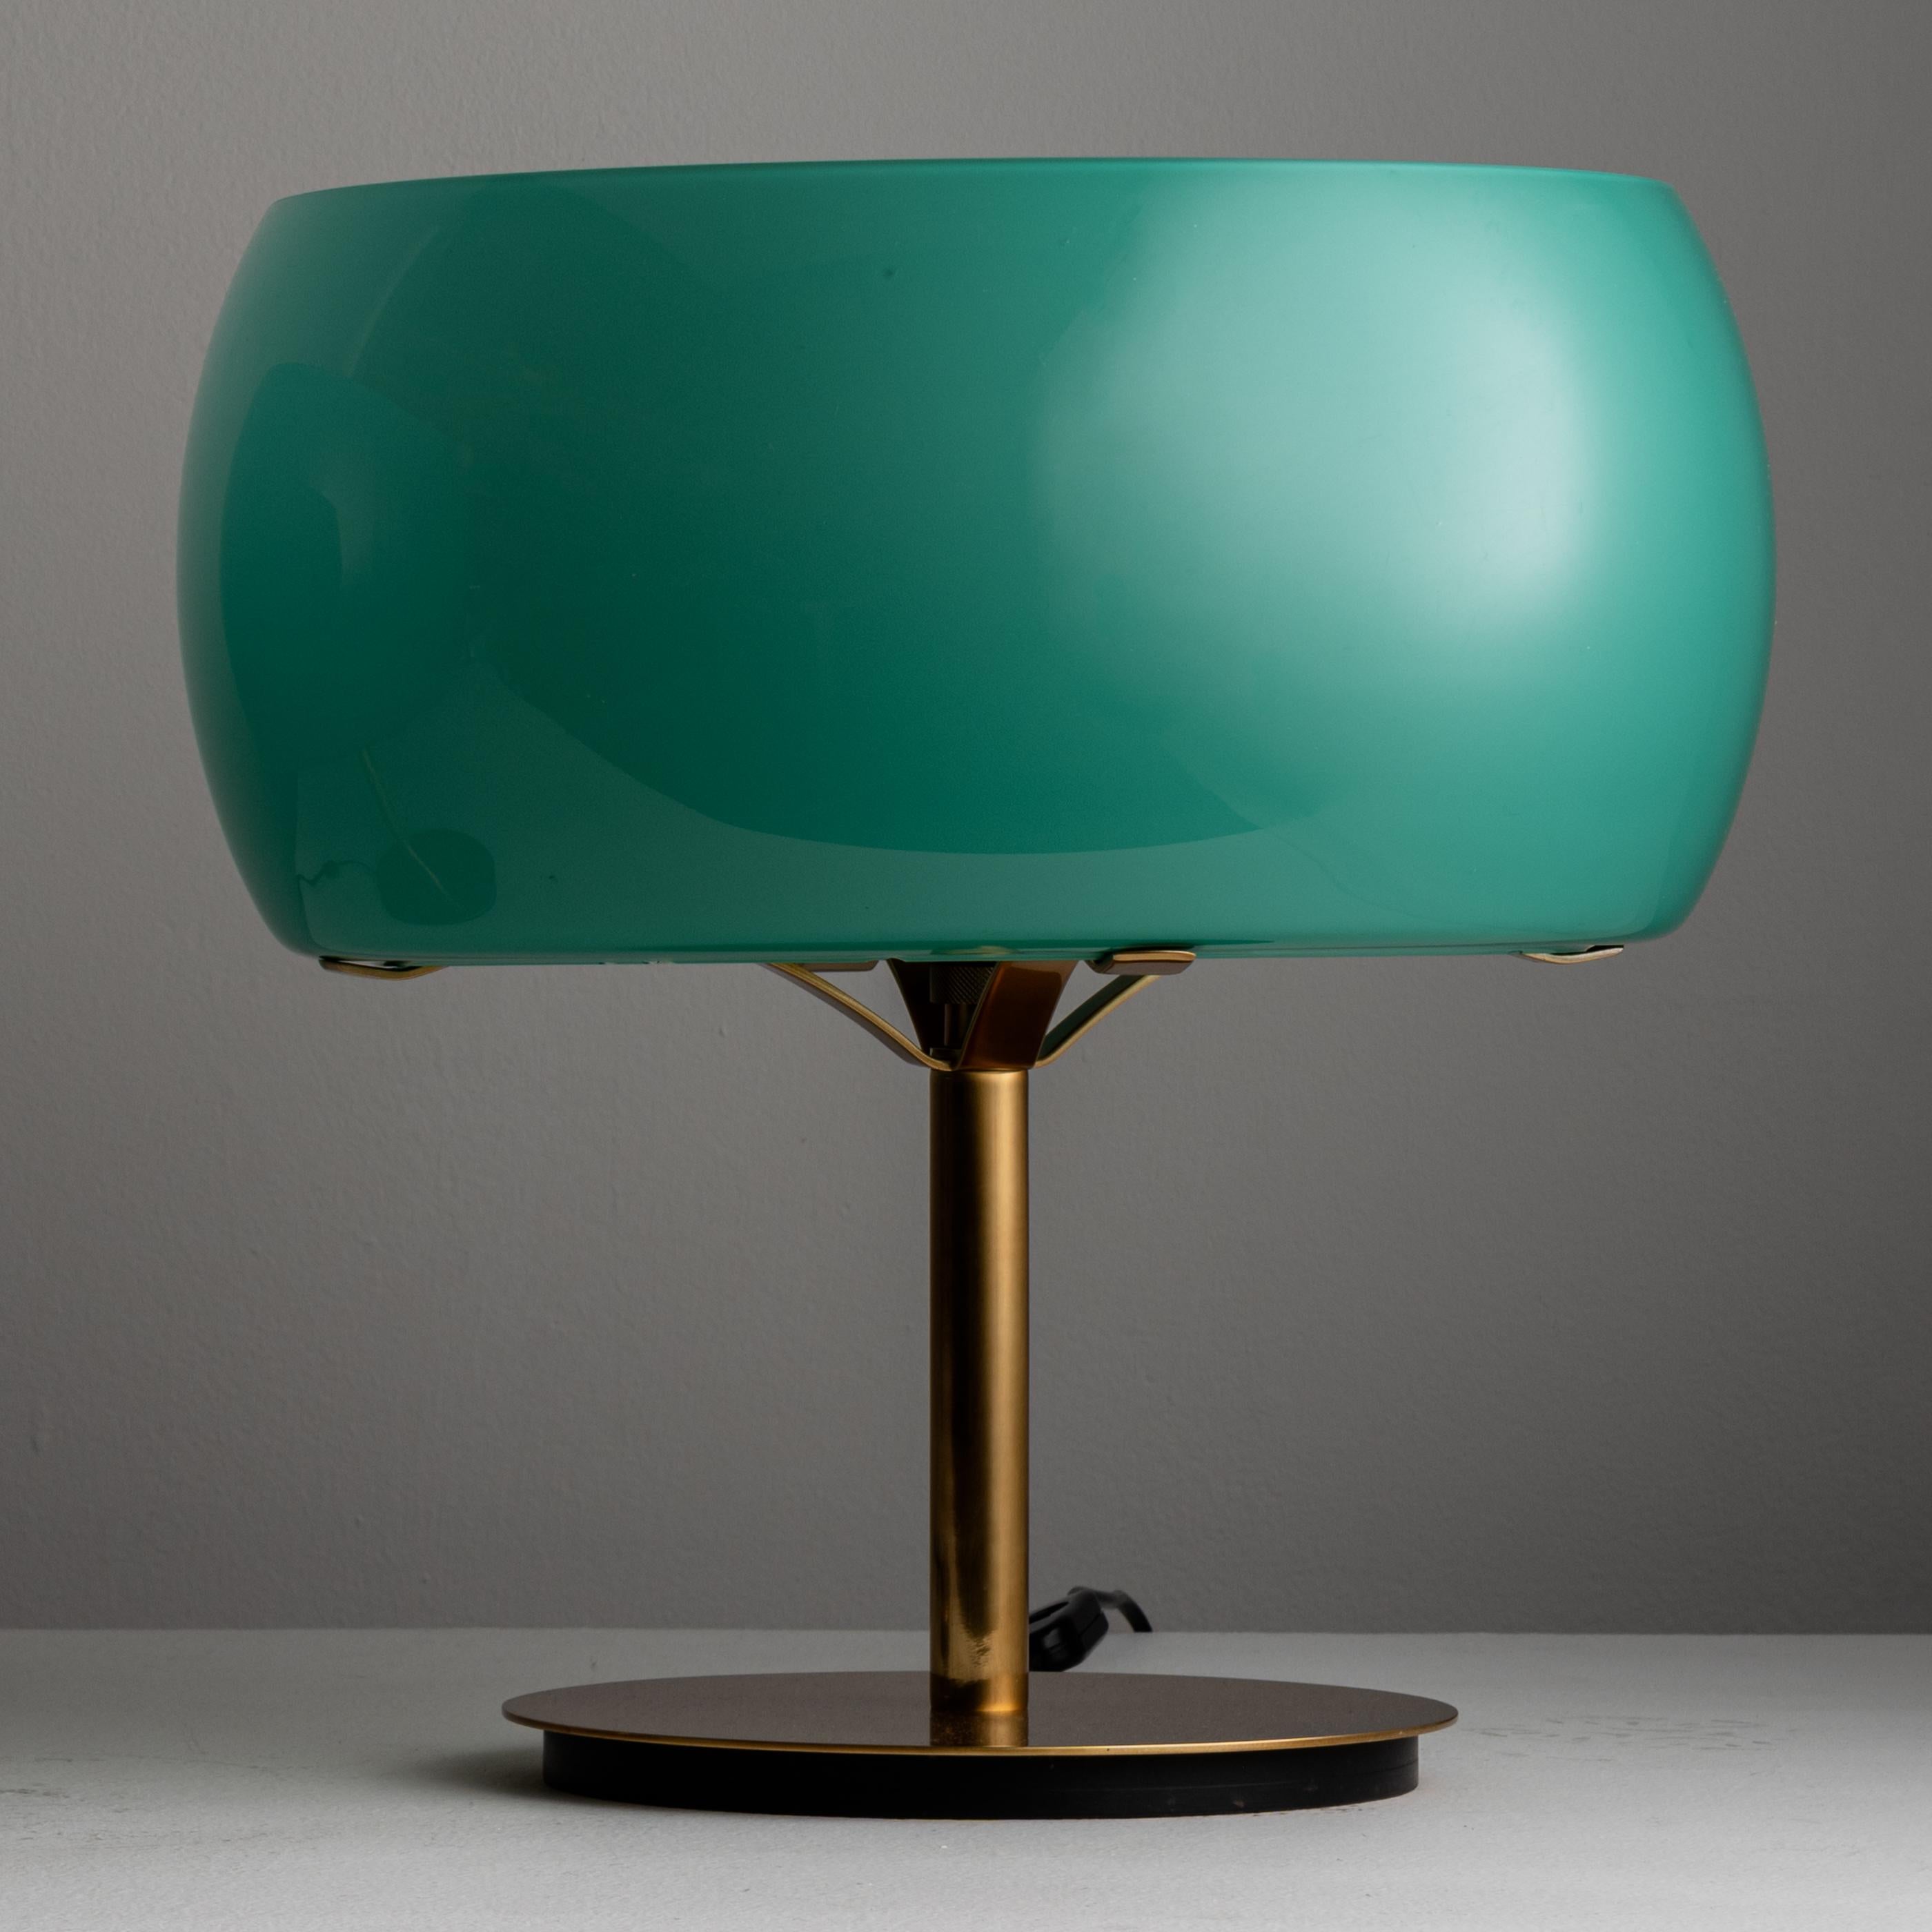 Rare pair of 'Erse' Table Lamps by Vico Magistretti for Artemide. Designed and manufactured in Italy, 1964. The base and stem of the lamp is constructed of polished brass. External orbital shade is made of teal colored glass which wraps around a